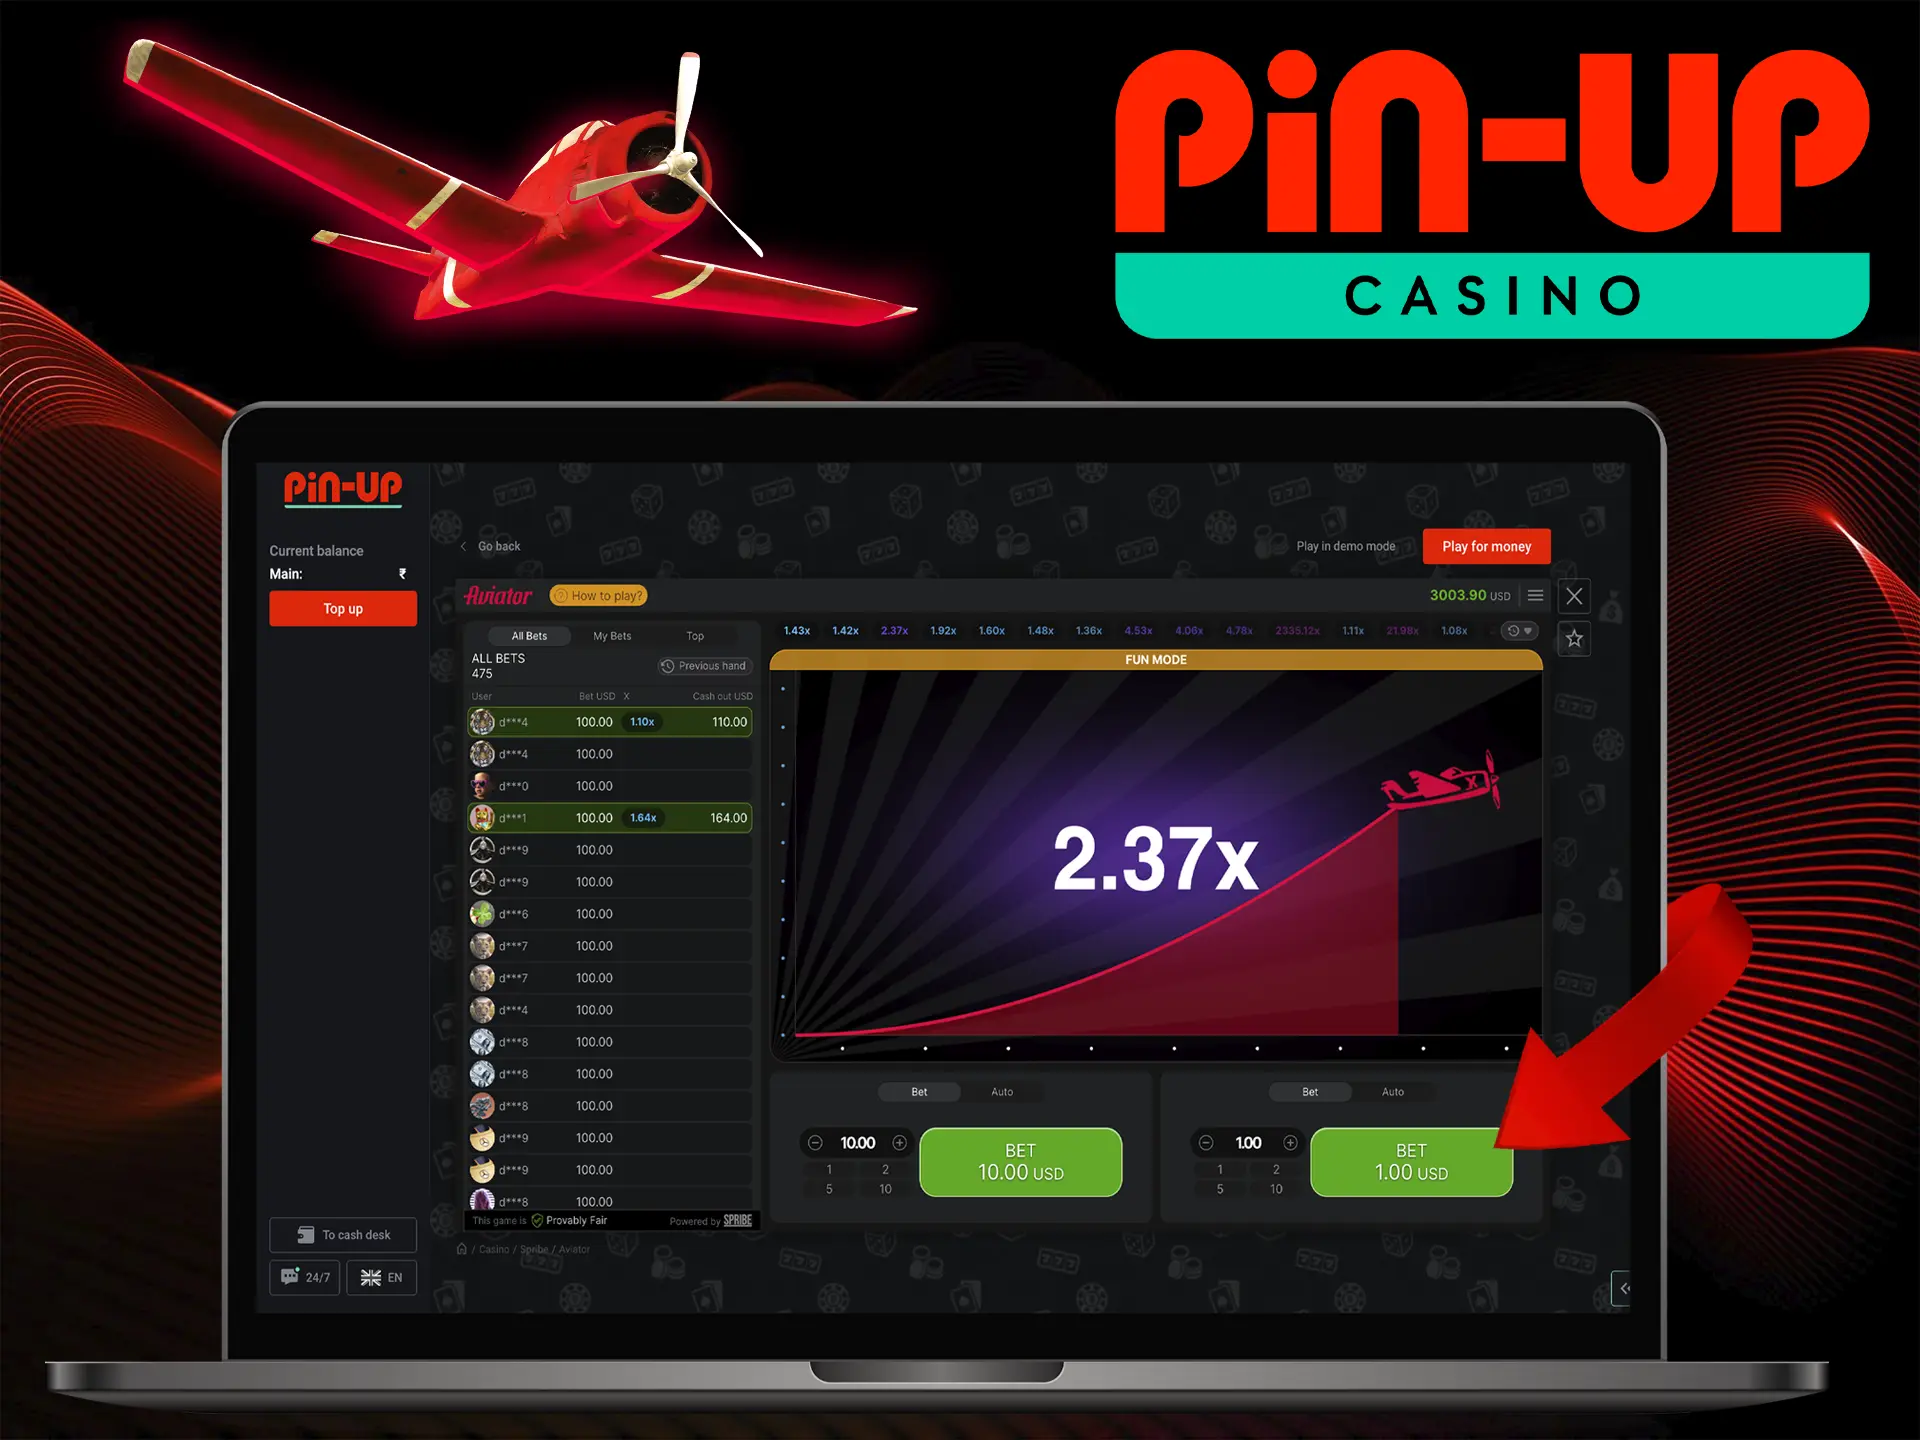 Register your account and start playing and winning at Aviator from Pin Up Casino.